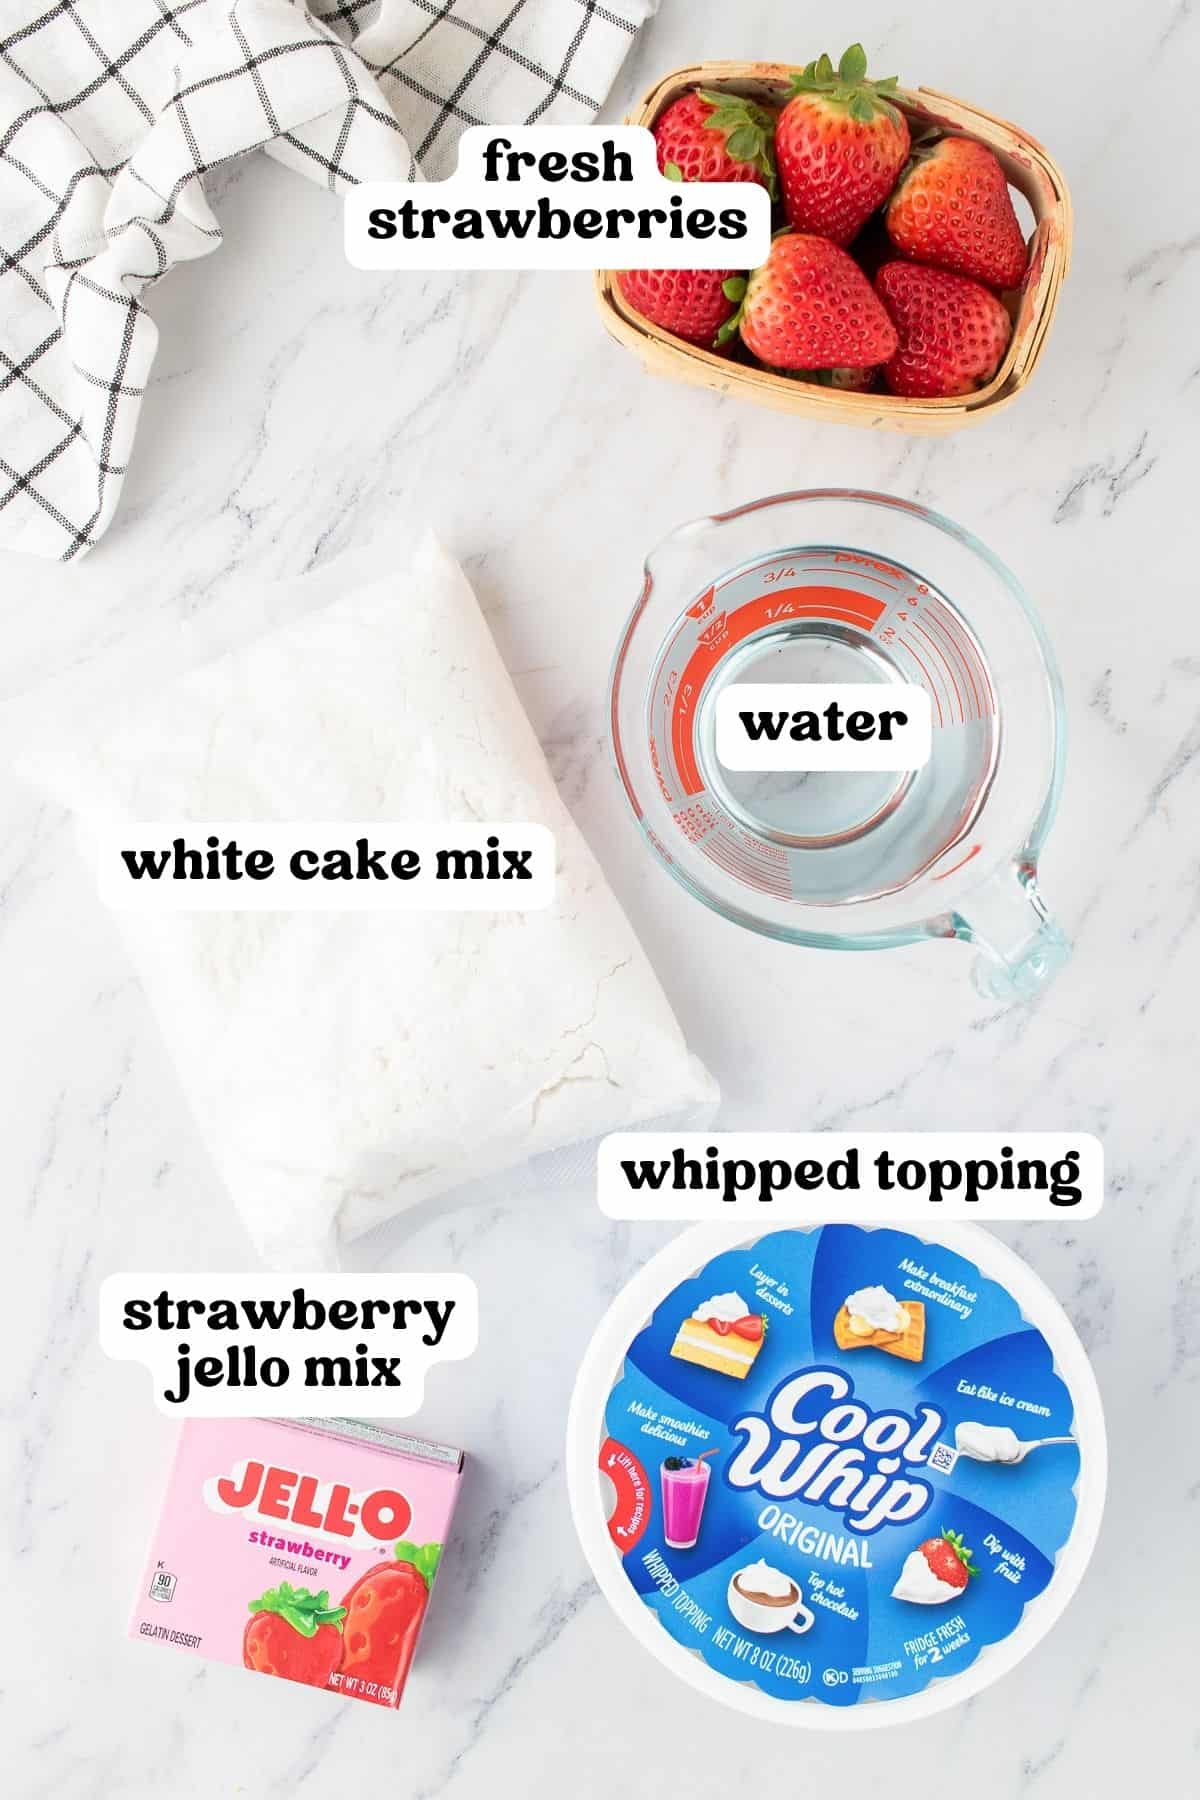 Fresh strawberries, white cake mix, water, cool whip whipped topping, and box of strawberry jello.